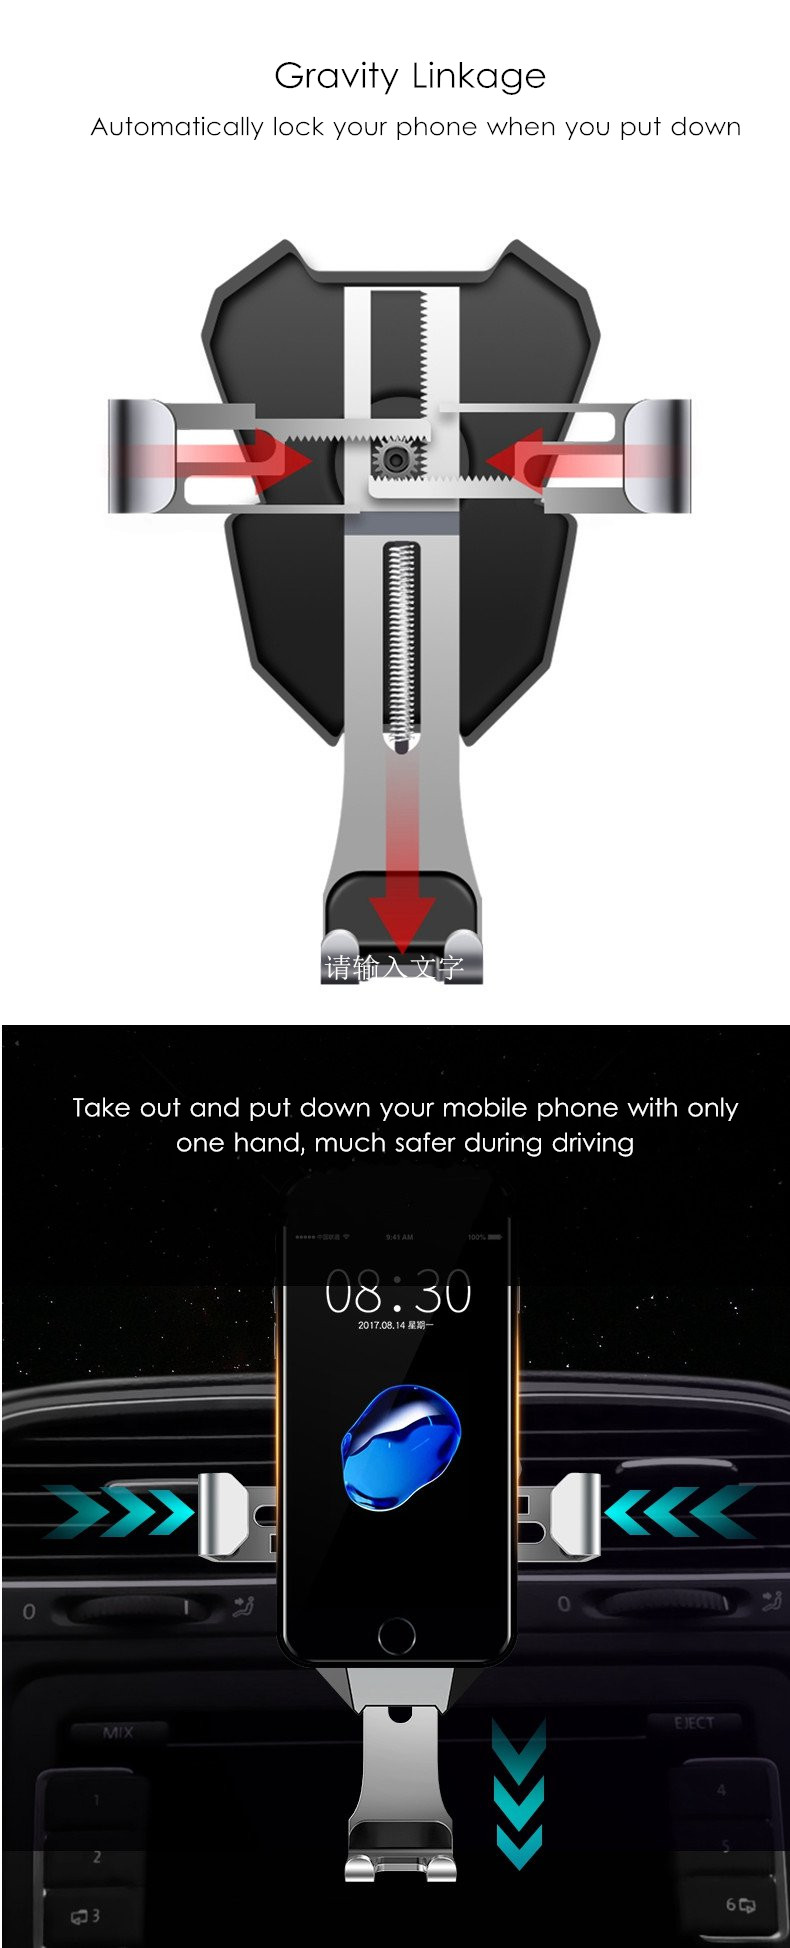 Universal-Gravity-Linkage-Auto-Lock-Metal-Car-Mount-Air-Vent-Phone-Holder-Stand-for-Mobile-Phone-1242152-2